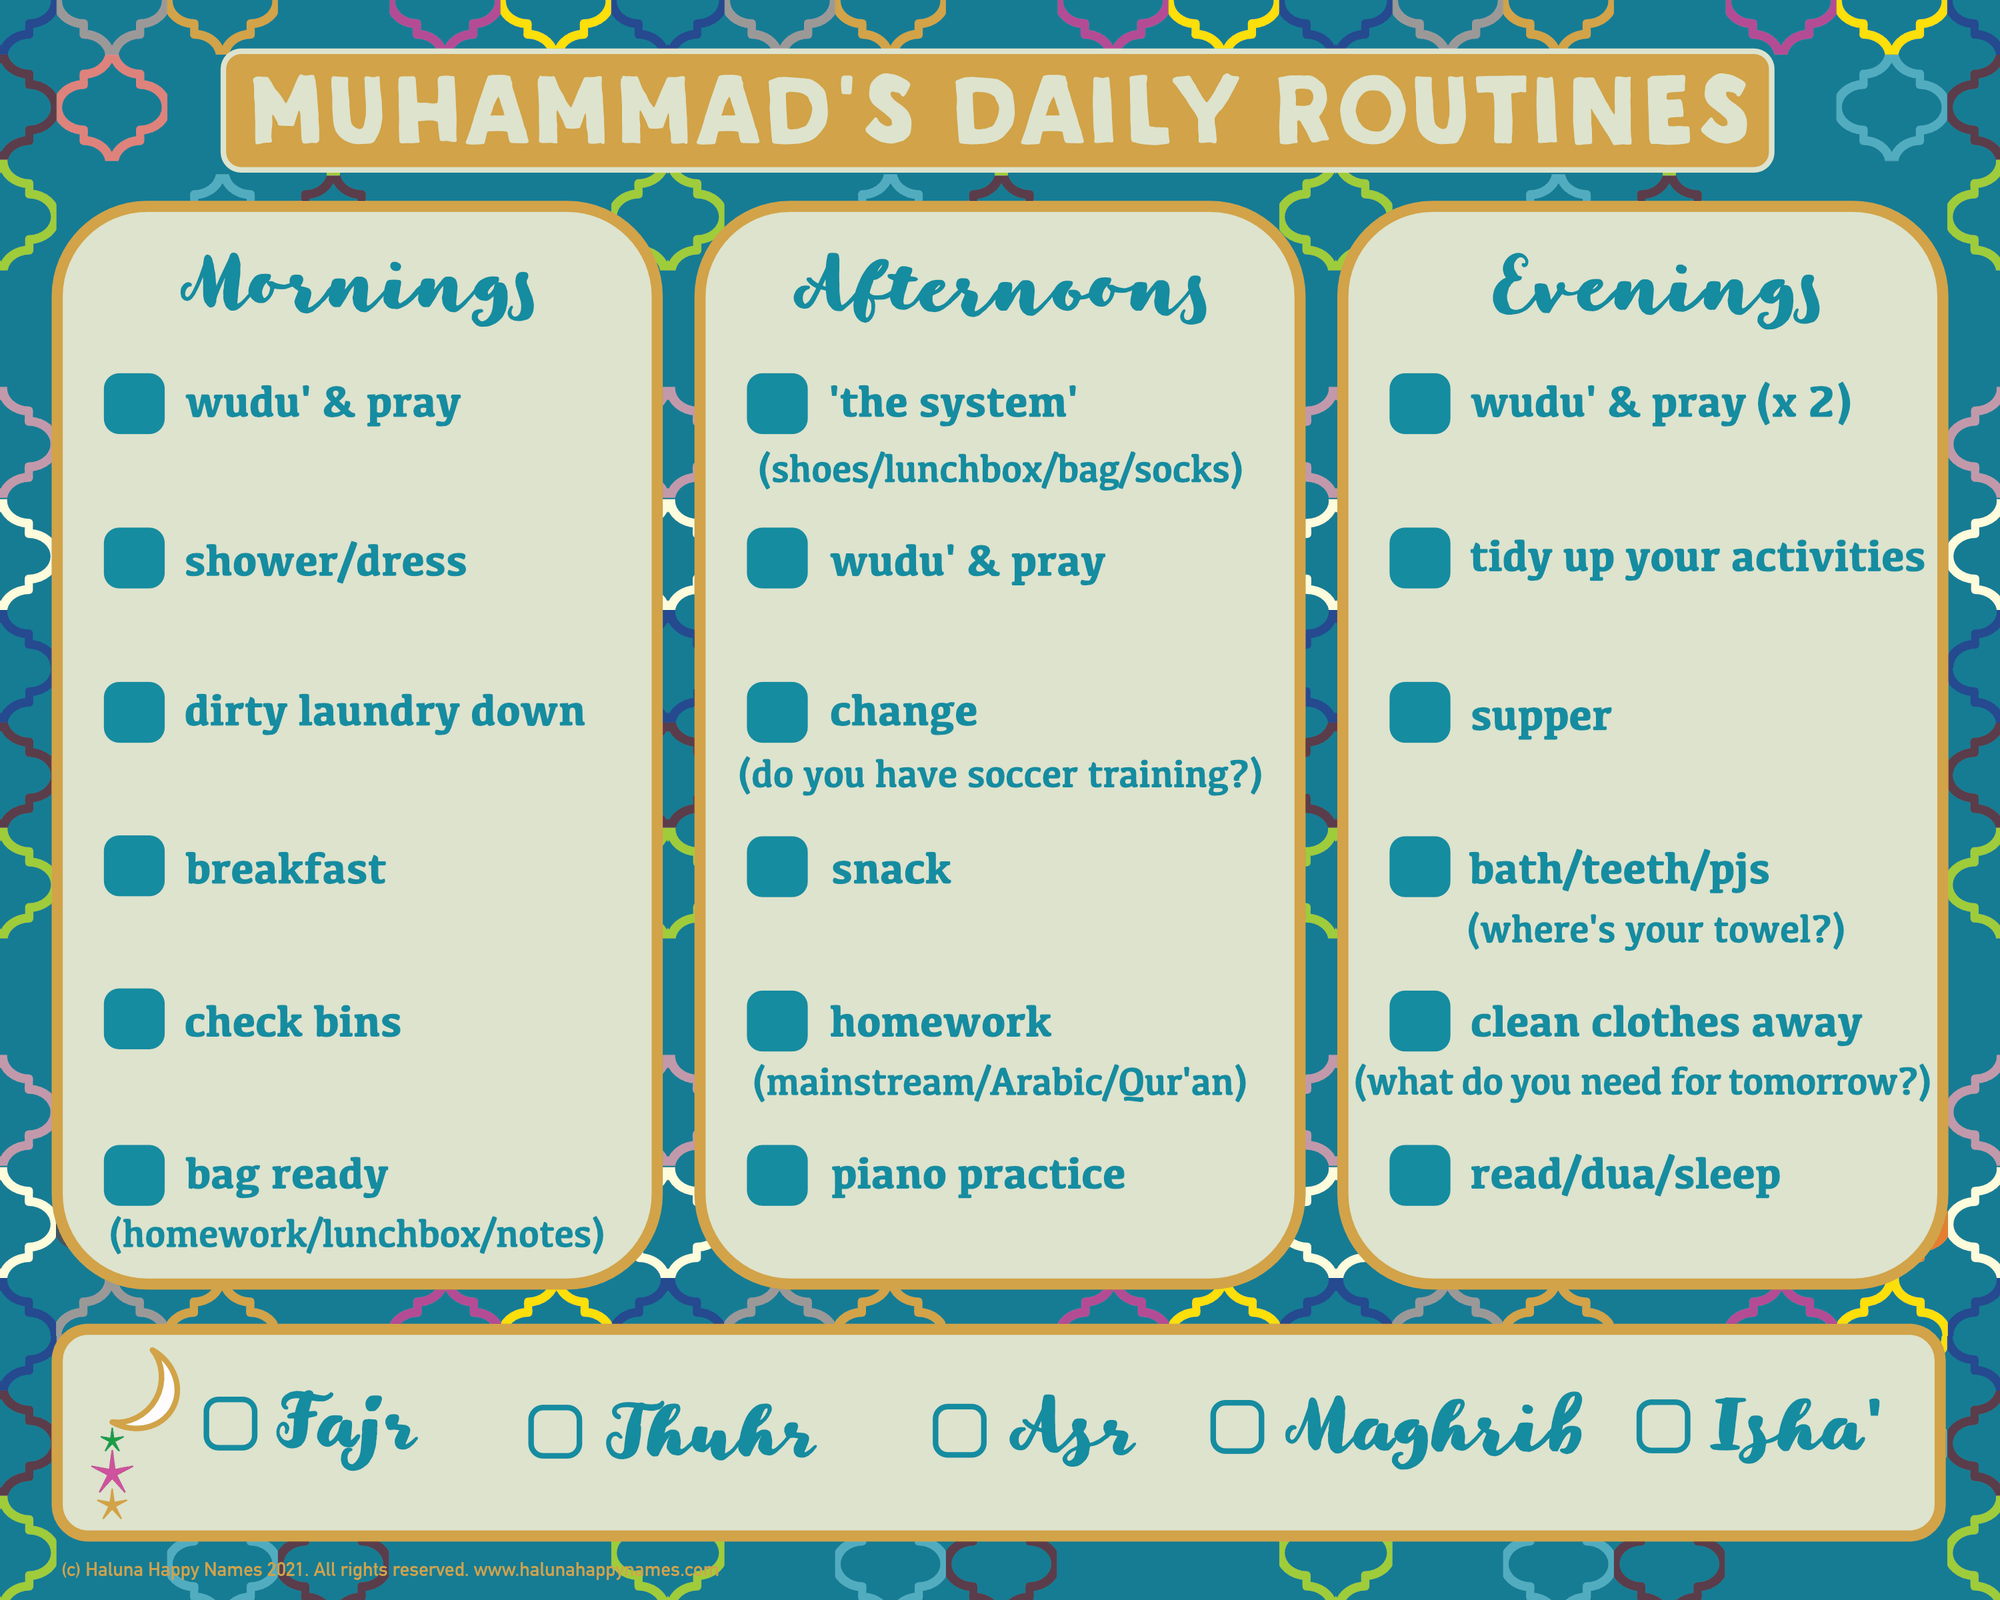 The Haluna Happy Names exclusive 'Maroc Magic' design is a teal background with multicoloured repeating motif overlaid. This is the background for a routine tracker. The sample shown here shows 'Muhammad's Daily routines' at the top, and 3 parallel panels for Mornings, Afternoons and Evenings, each panel having 6 items to check off each day. Beneath is a horizontal panel with 5 items: the Muslim 5 daily prayers with a checkbox beside each.